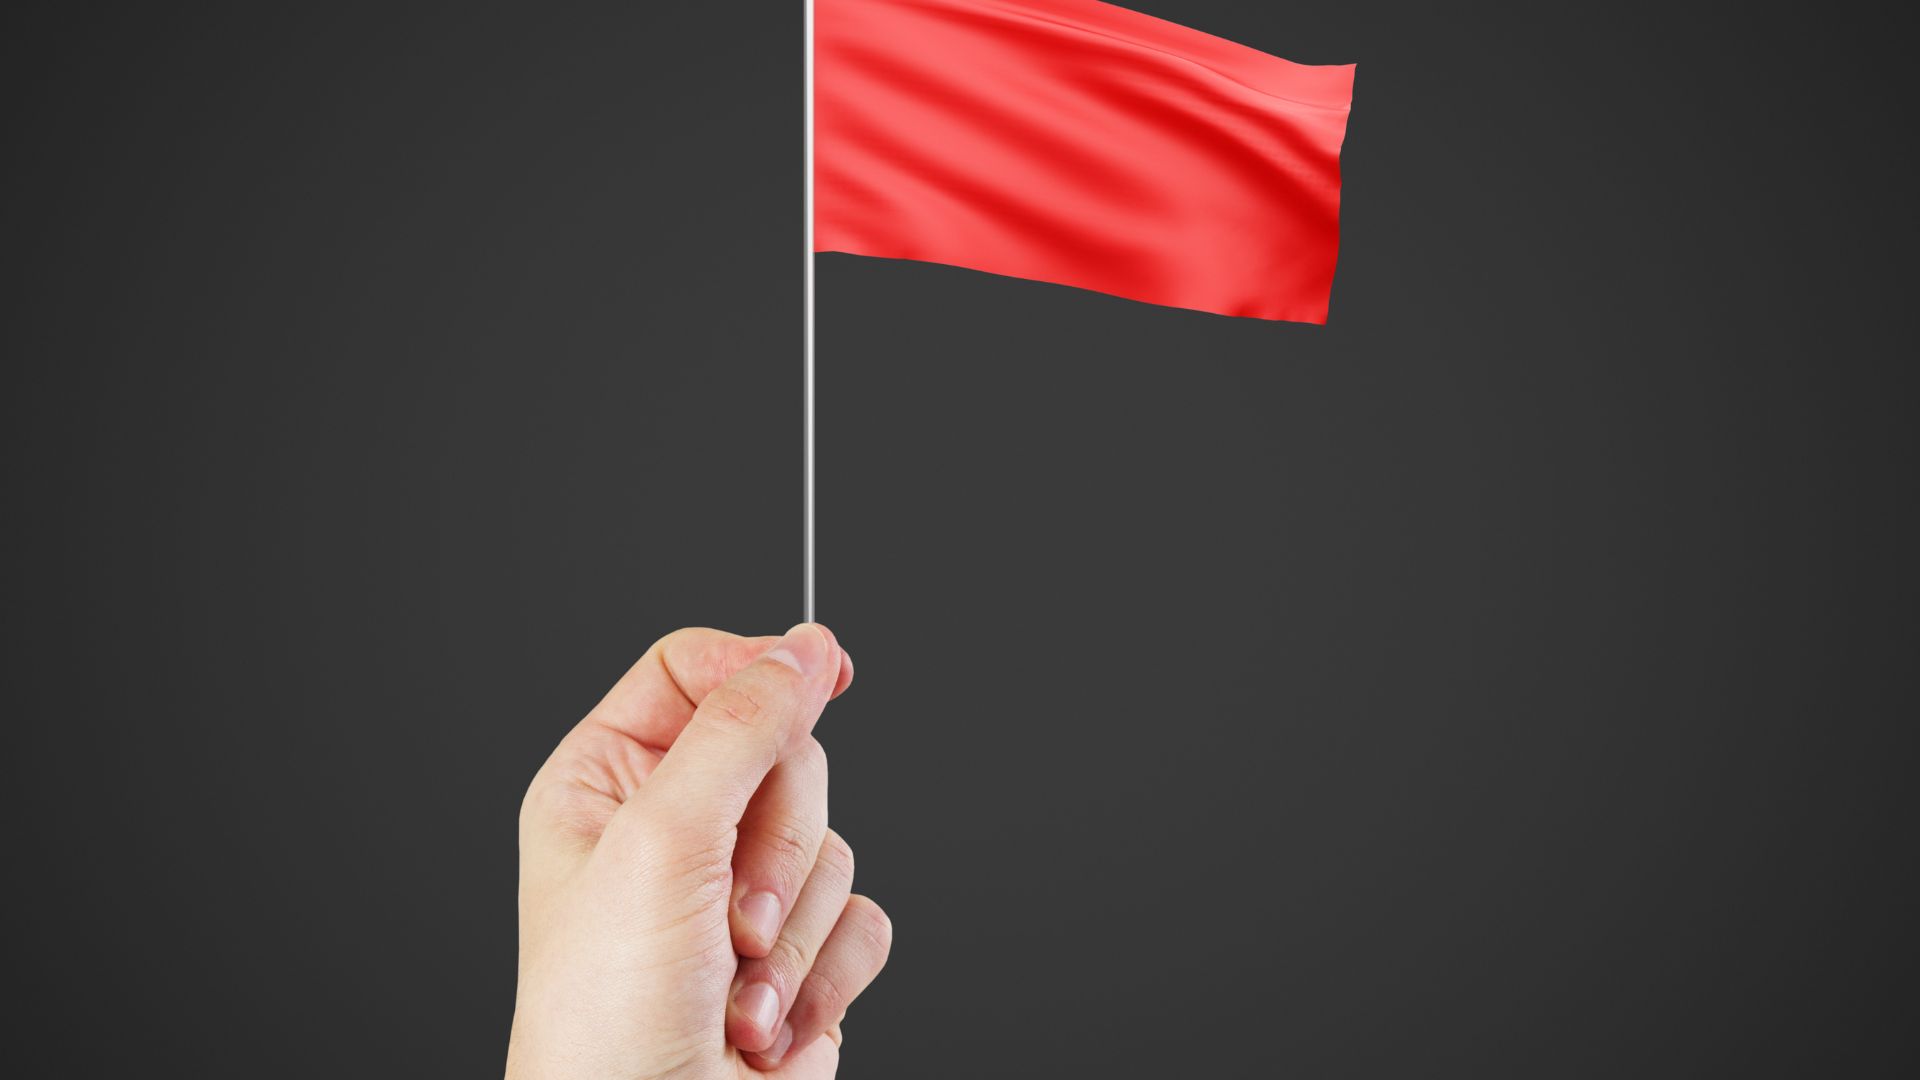 7 Red Flags While Hiring a Marketing Agency